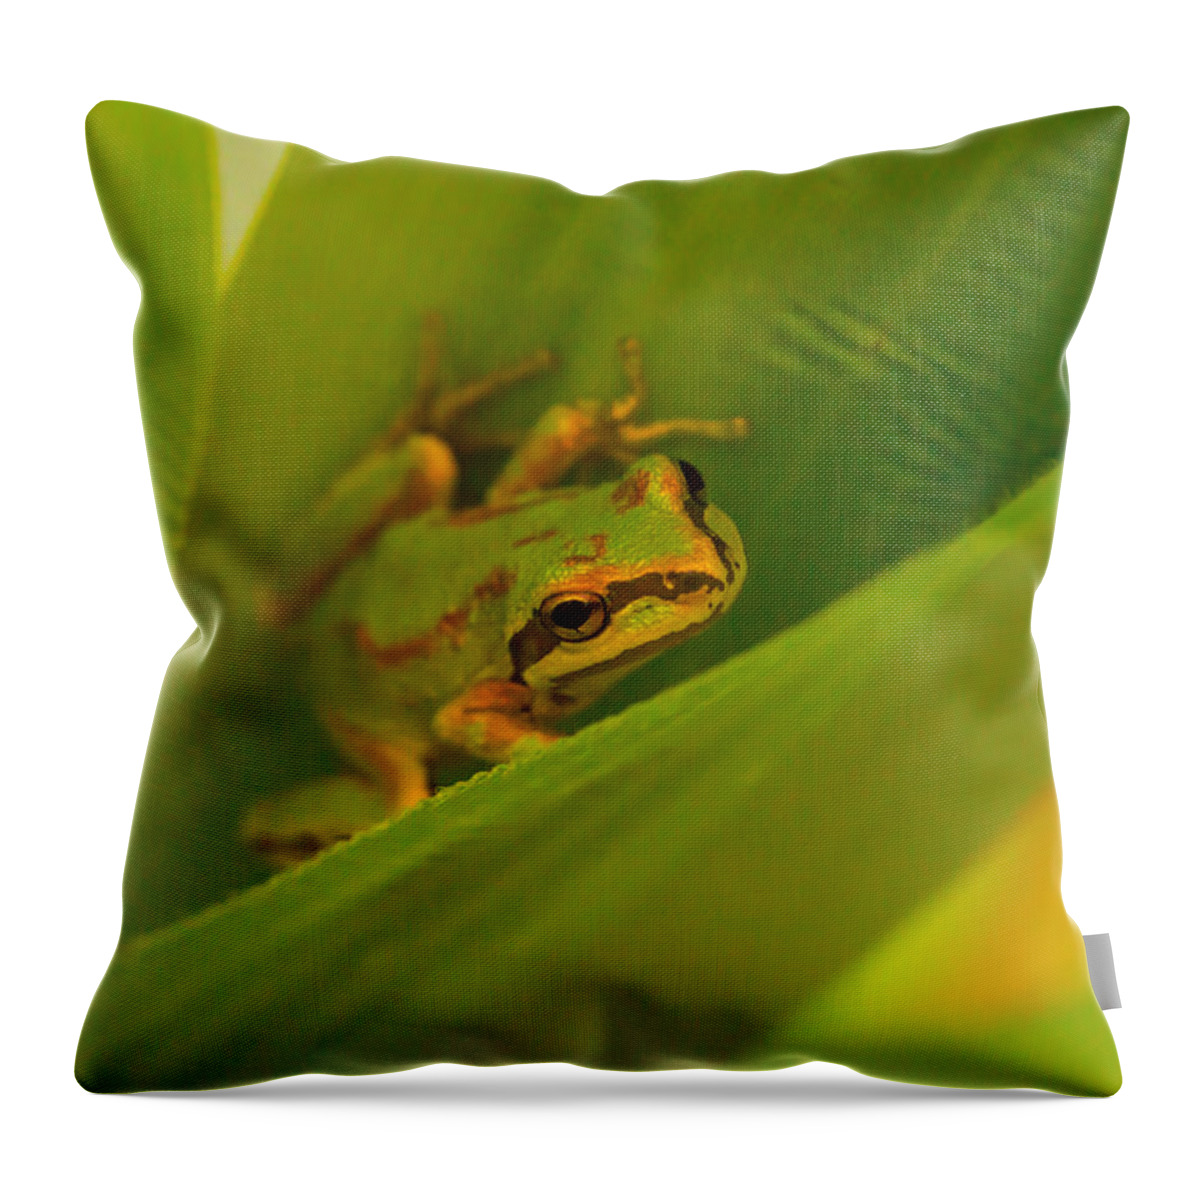 Frog Throw Pillow featuring the photograph The Frog by Dennis Bucklin